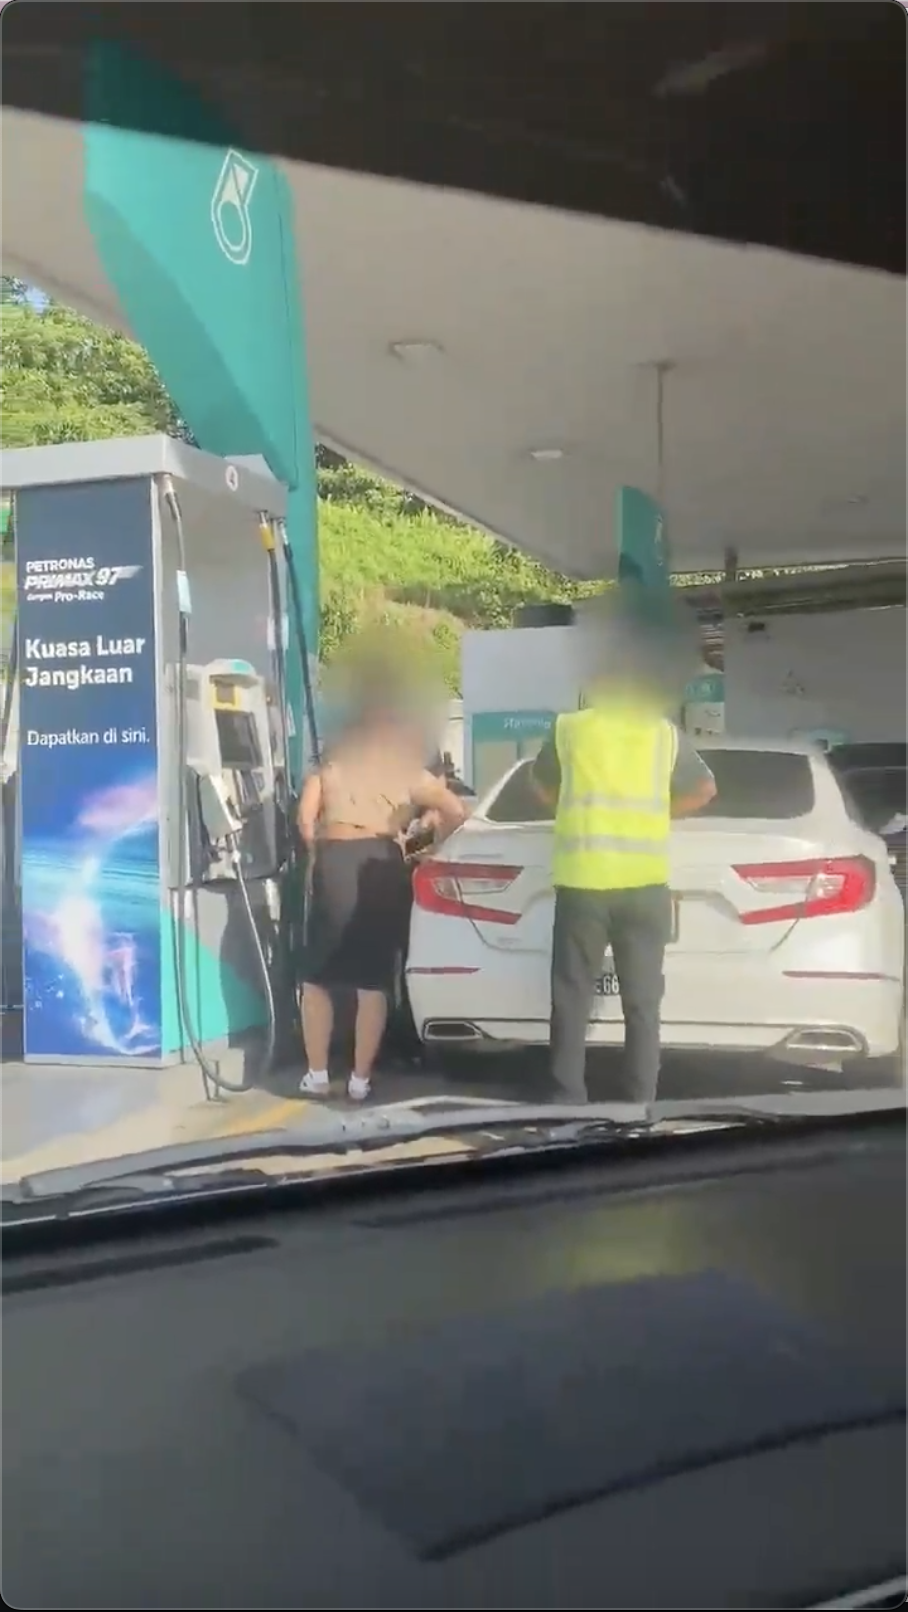 Petrol station worker helping couple with thai car pump ron95 petrol